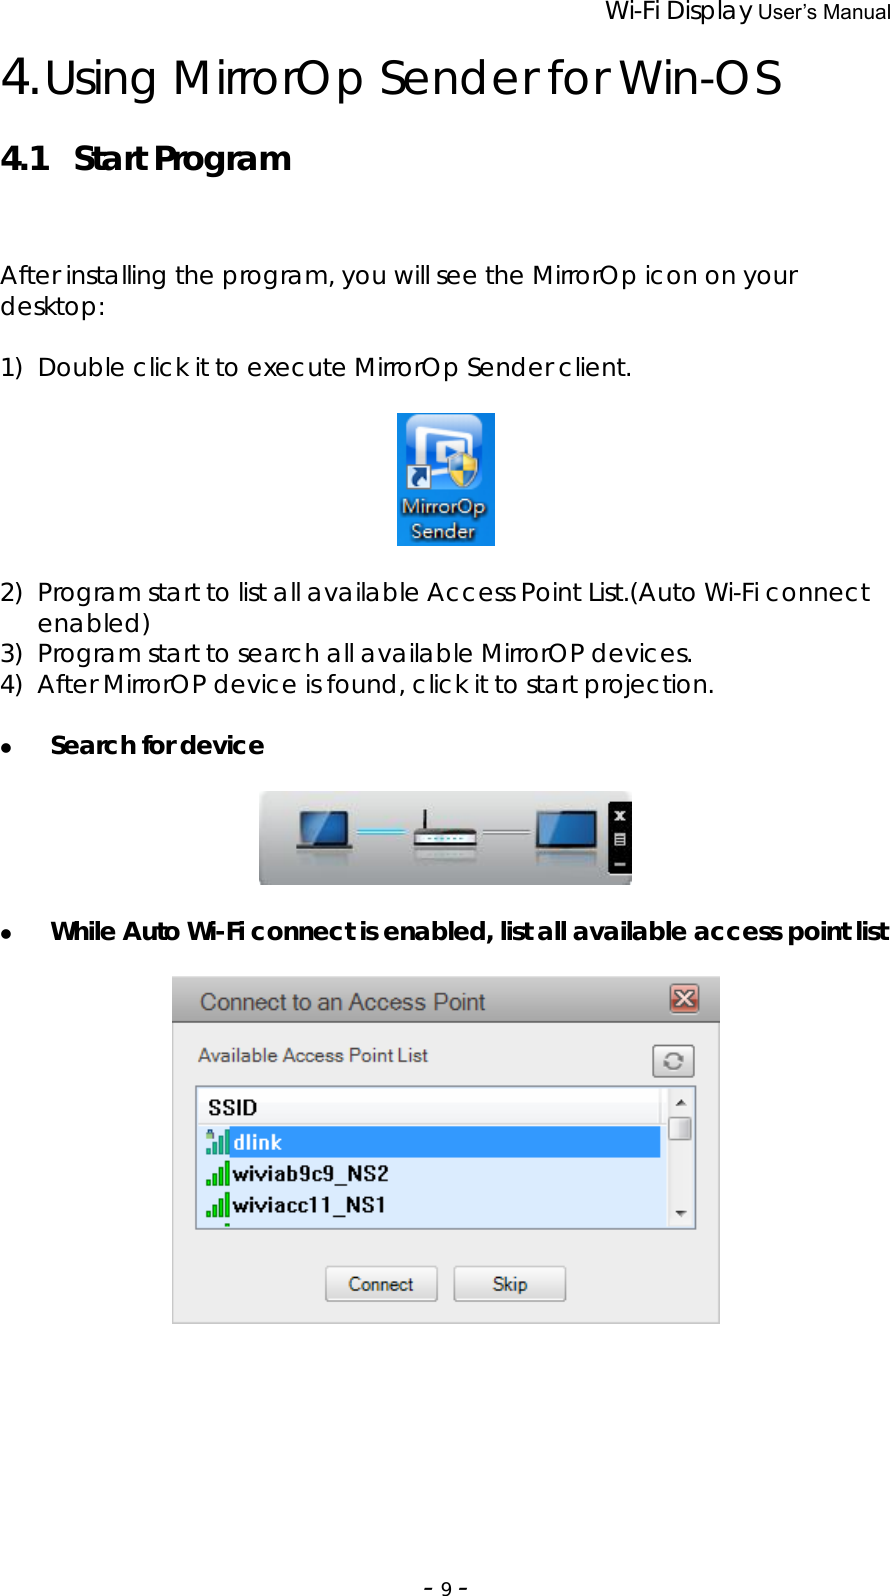                 Wi-Fi Display User’s Manual  ‐9‐4. Using MirrorOp Sender for Win-OS  4.1 Start Program After installing the program, you will see the MirrorOp icon on your desktop:  1) Double click it to execute MirrorOp Sender client.    2) Program start to list all available Access Point List.(Auto Wi-Fi connect enabled) 3) Program start to search all available MirrorOP devices. 4) After MirrorOP device is found, click it to start projection.    z Search for device     z While Auto Wi-Fi connect is enabled, list all available access point list            